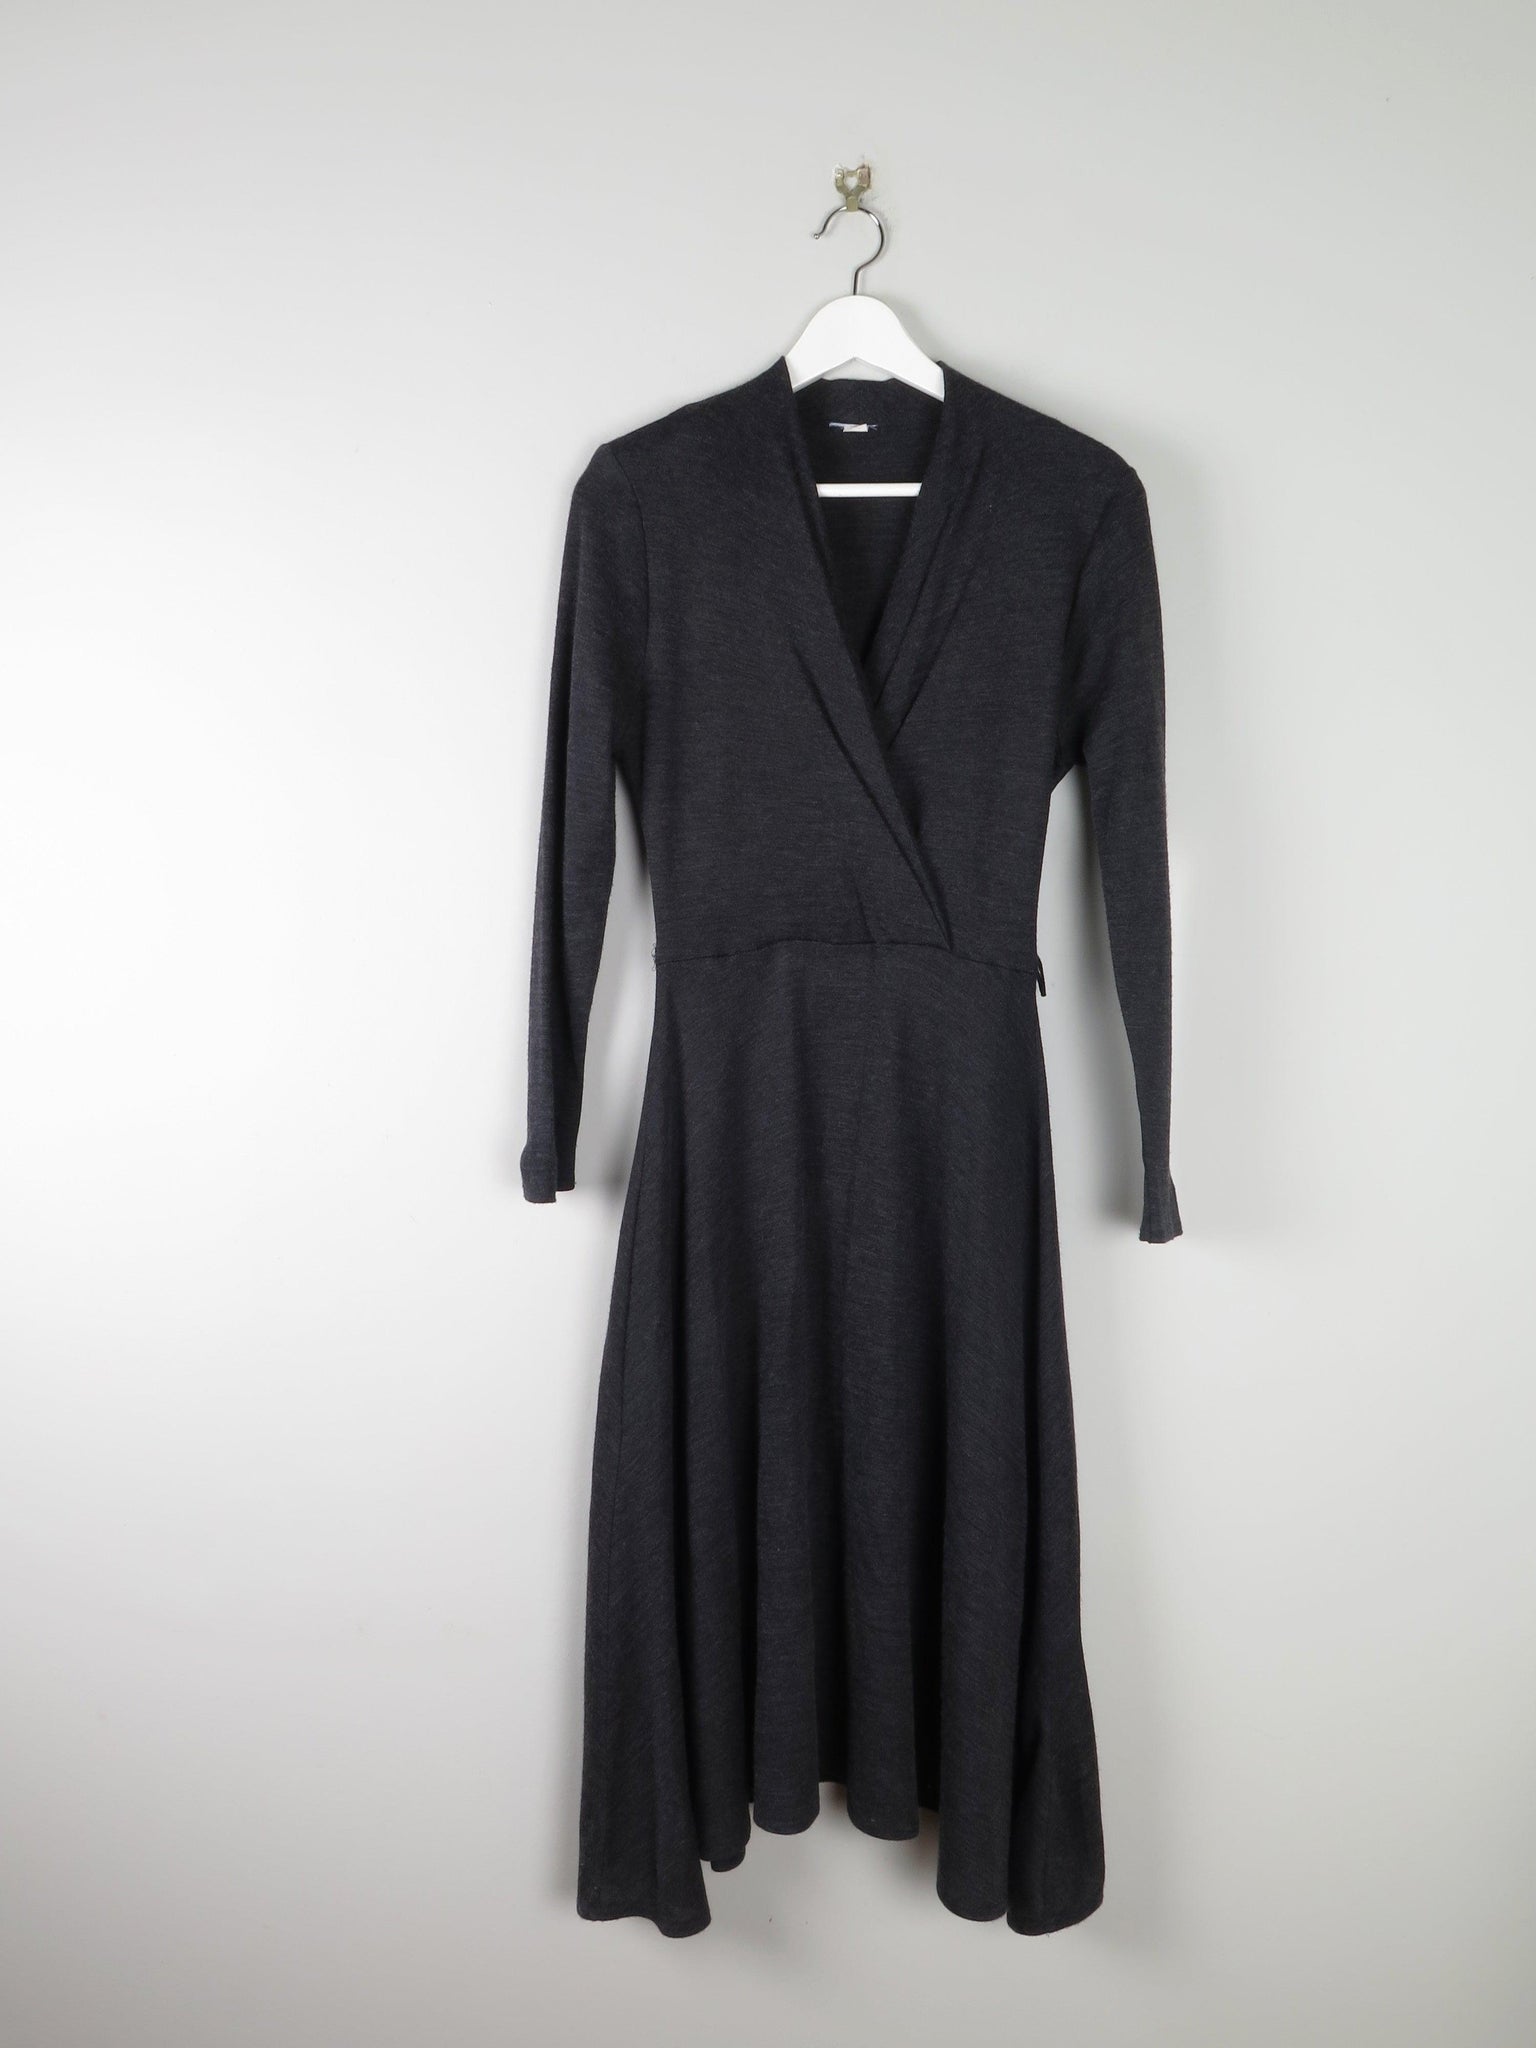 Vintage Charcoal Grey Dress Wrap Over Style S - The Harlequin